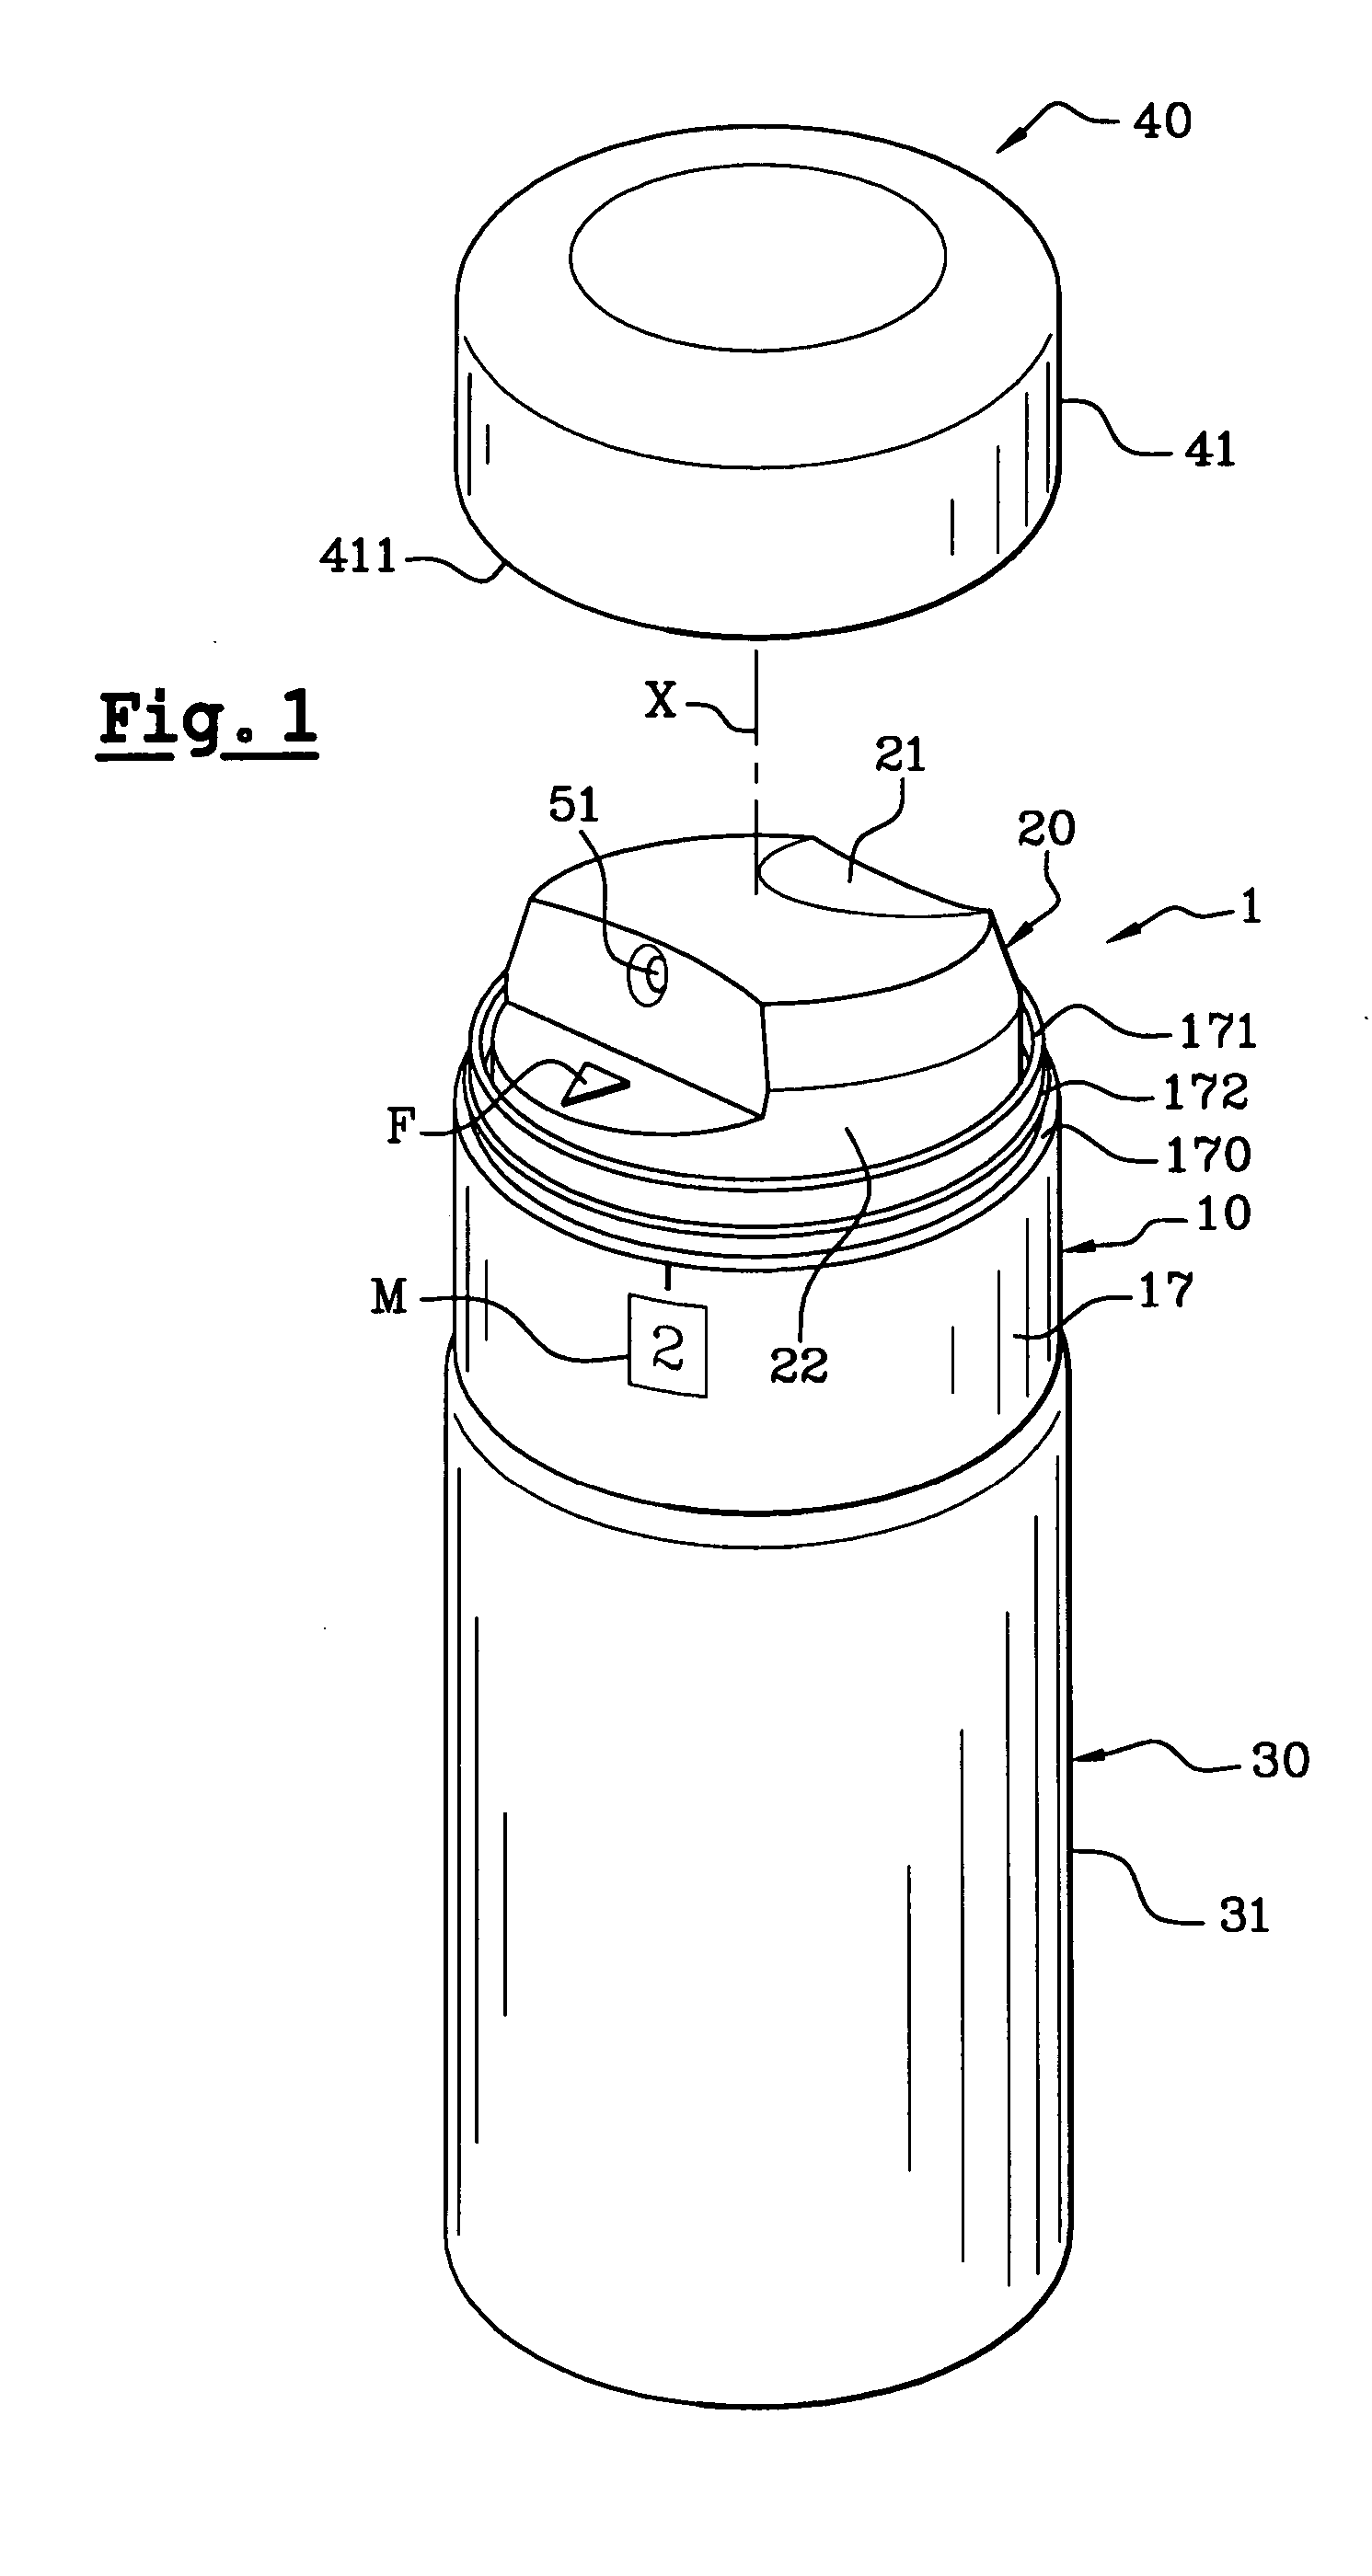 Product dispensing head and packaging with variable flow